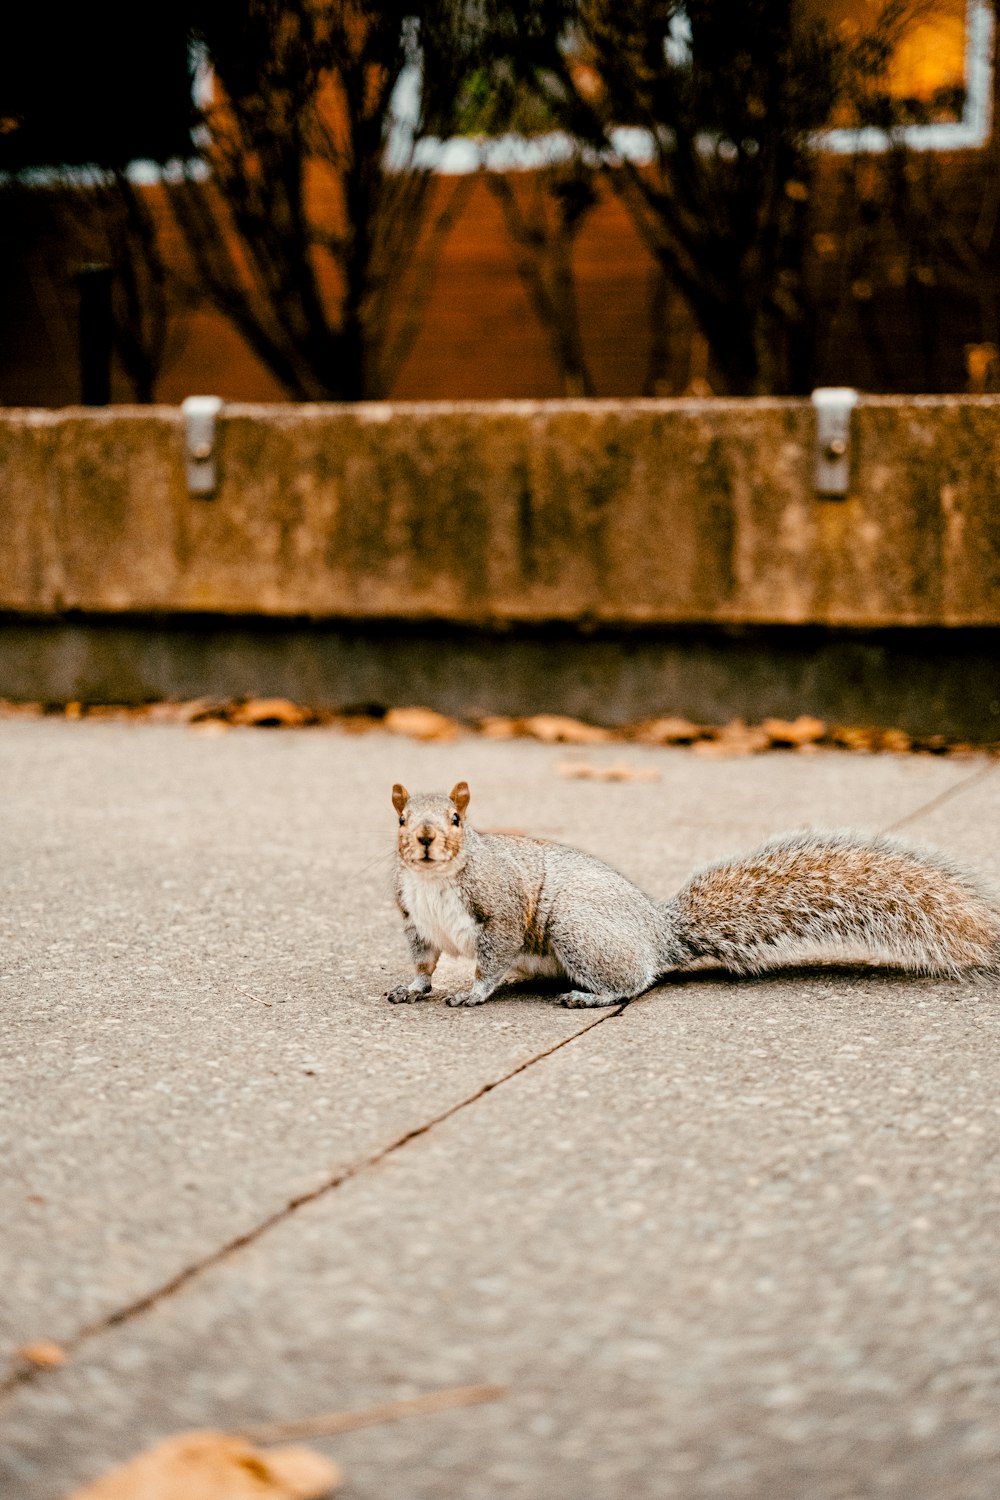 a squirrel sitting on the ground in front of a building